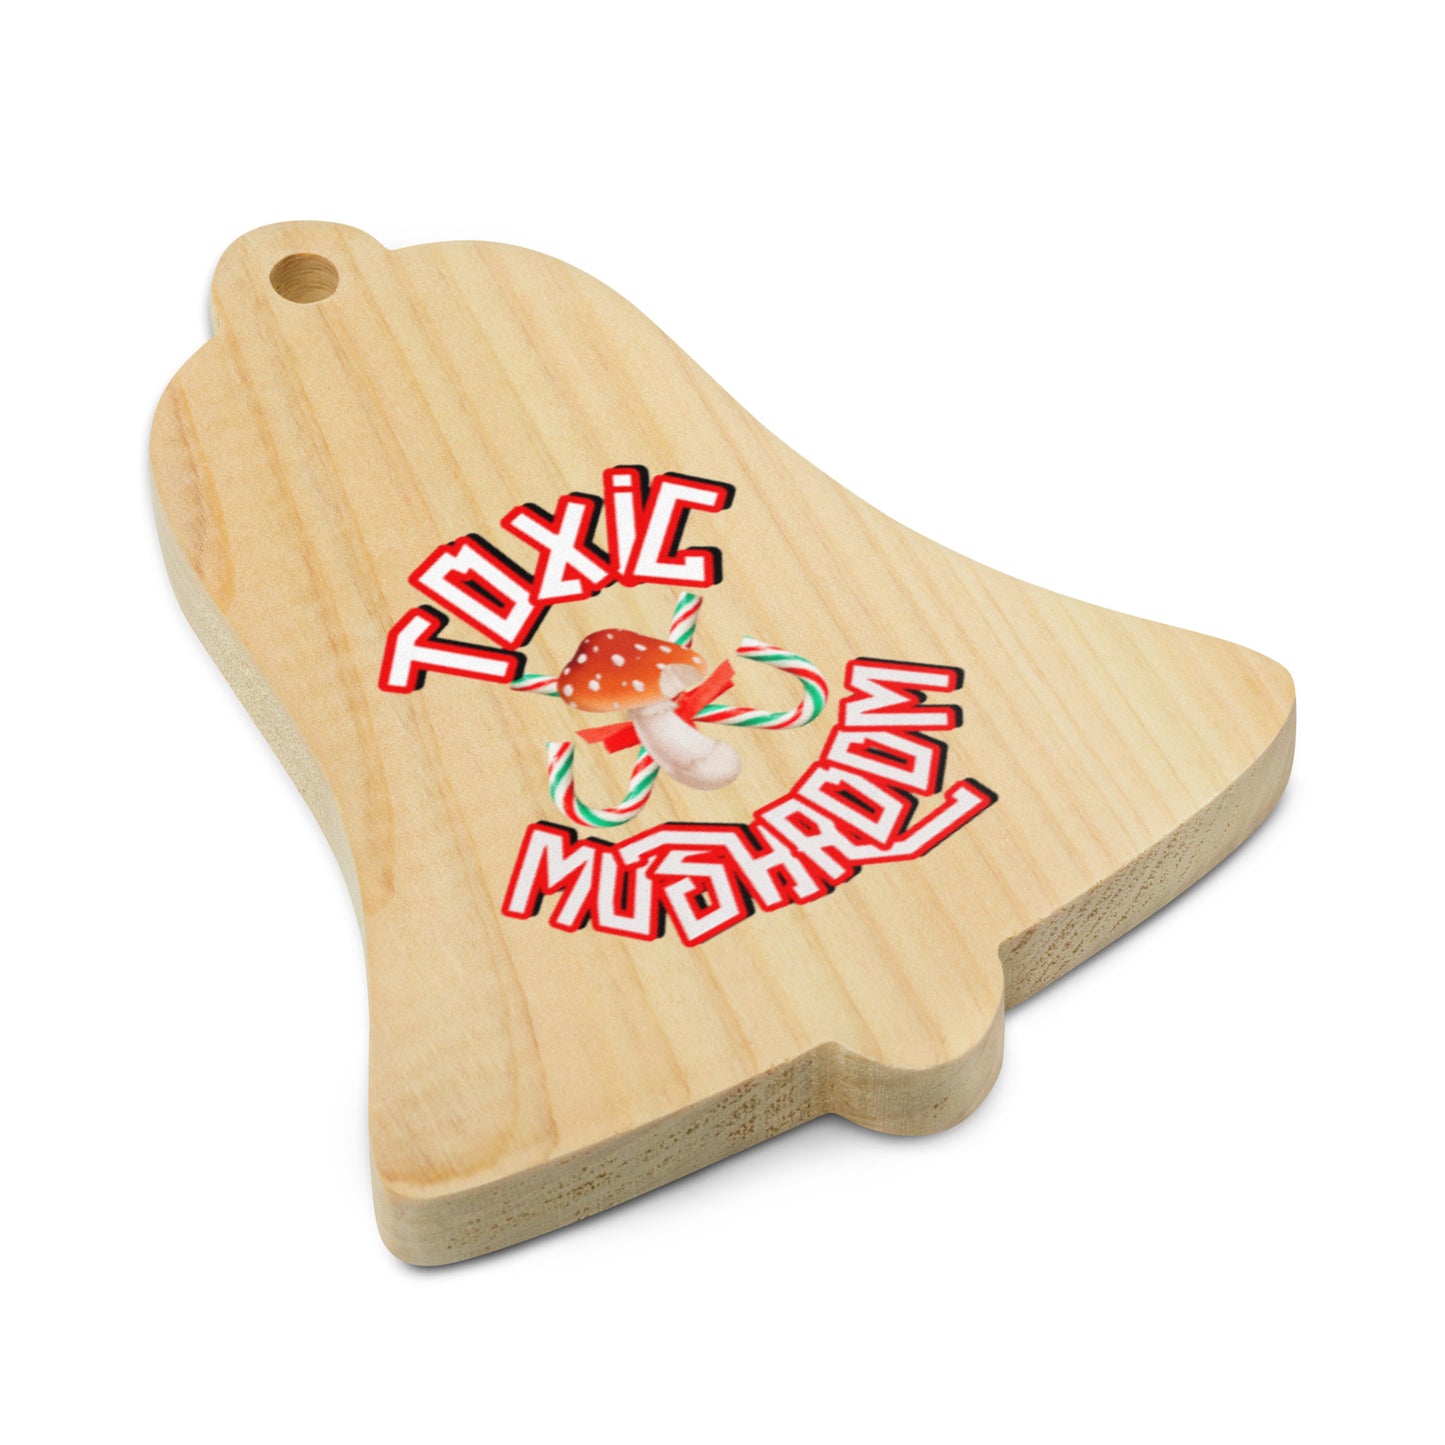 !st Toxic Holiday Wooden ornaments